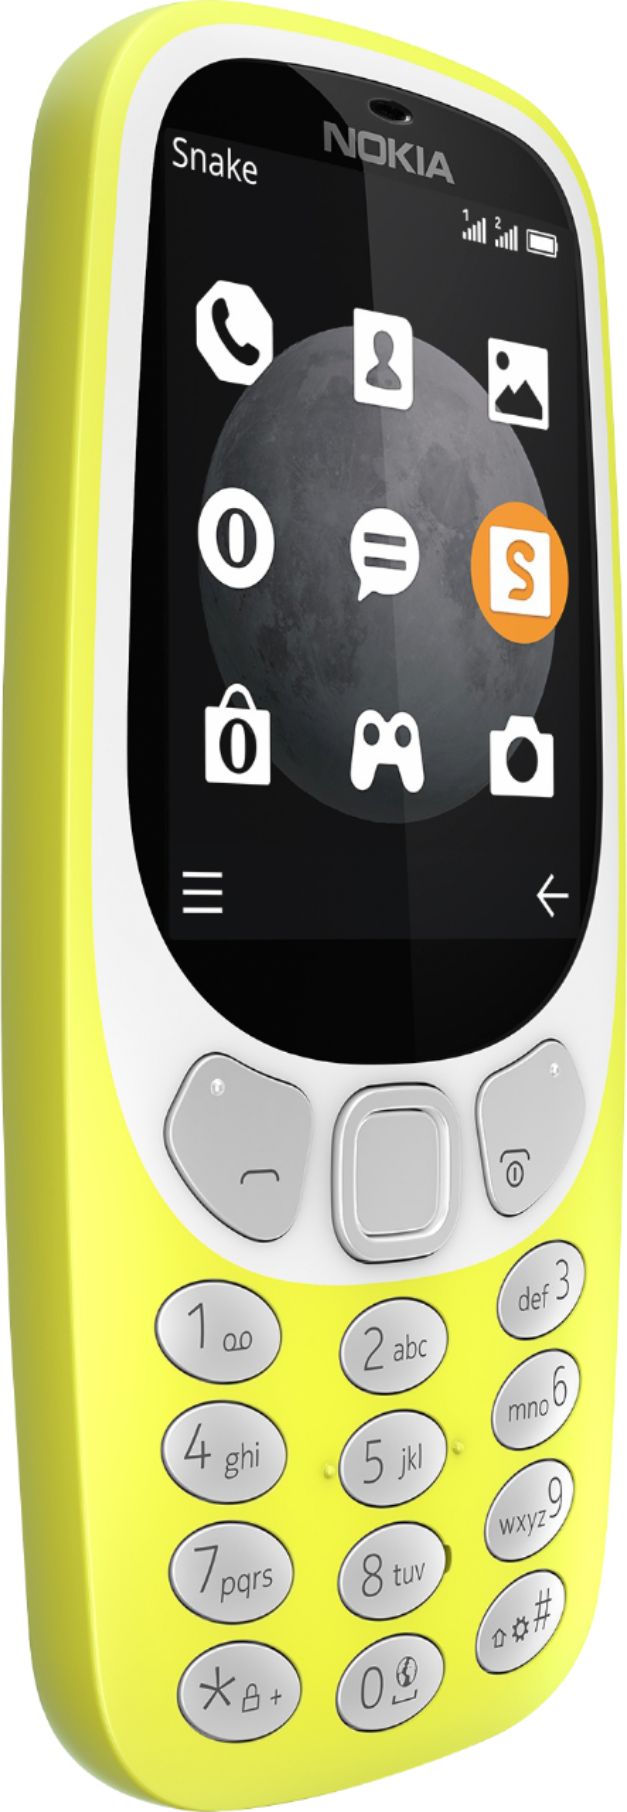 The Nokia 3310 is coming back: Here's how to play Snake right now